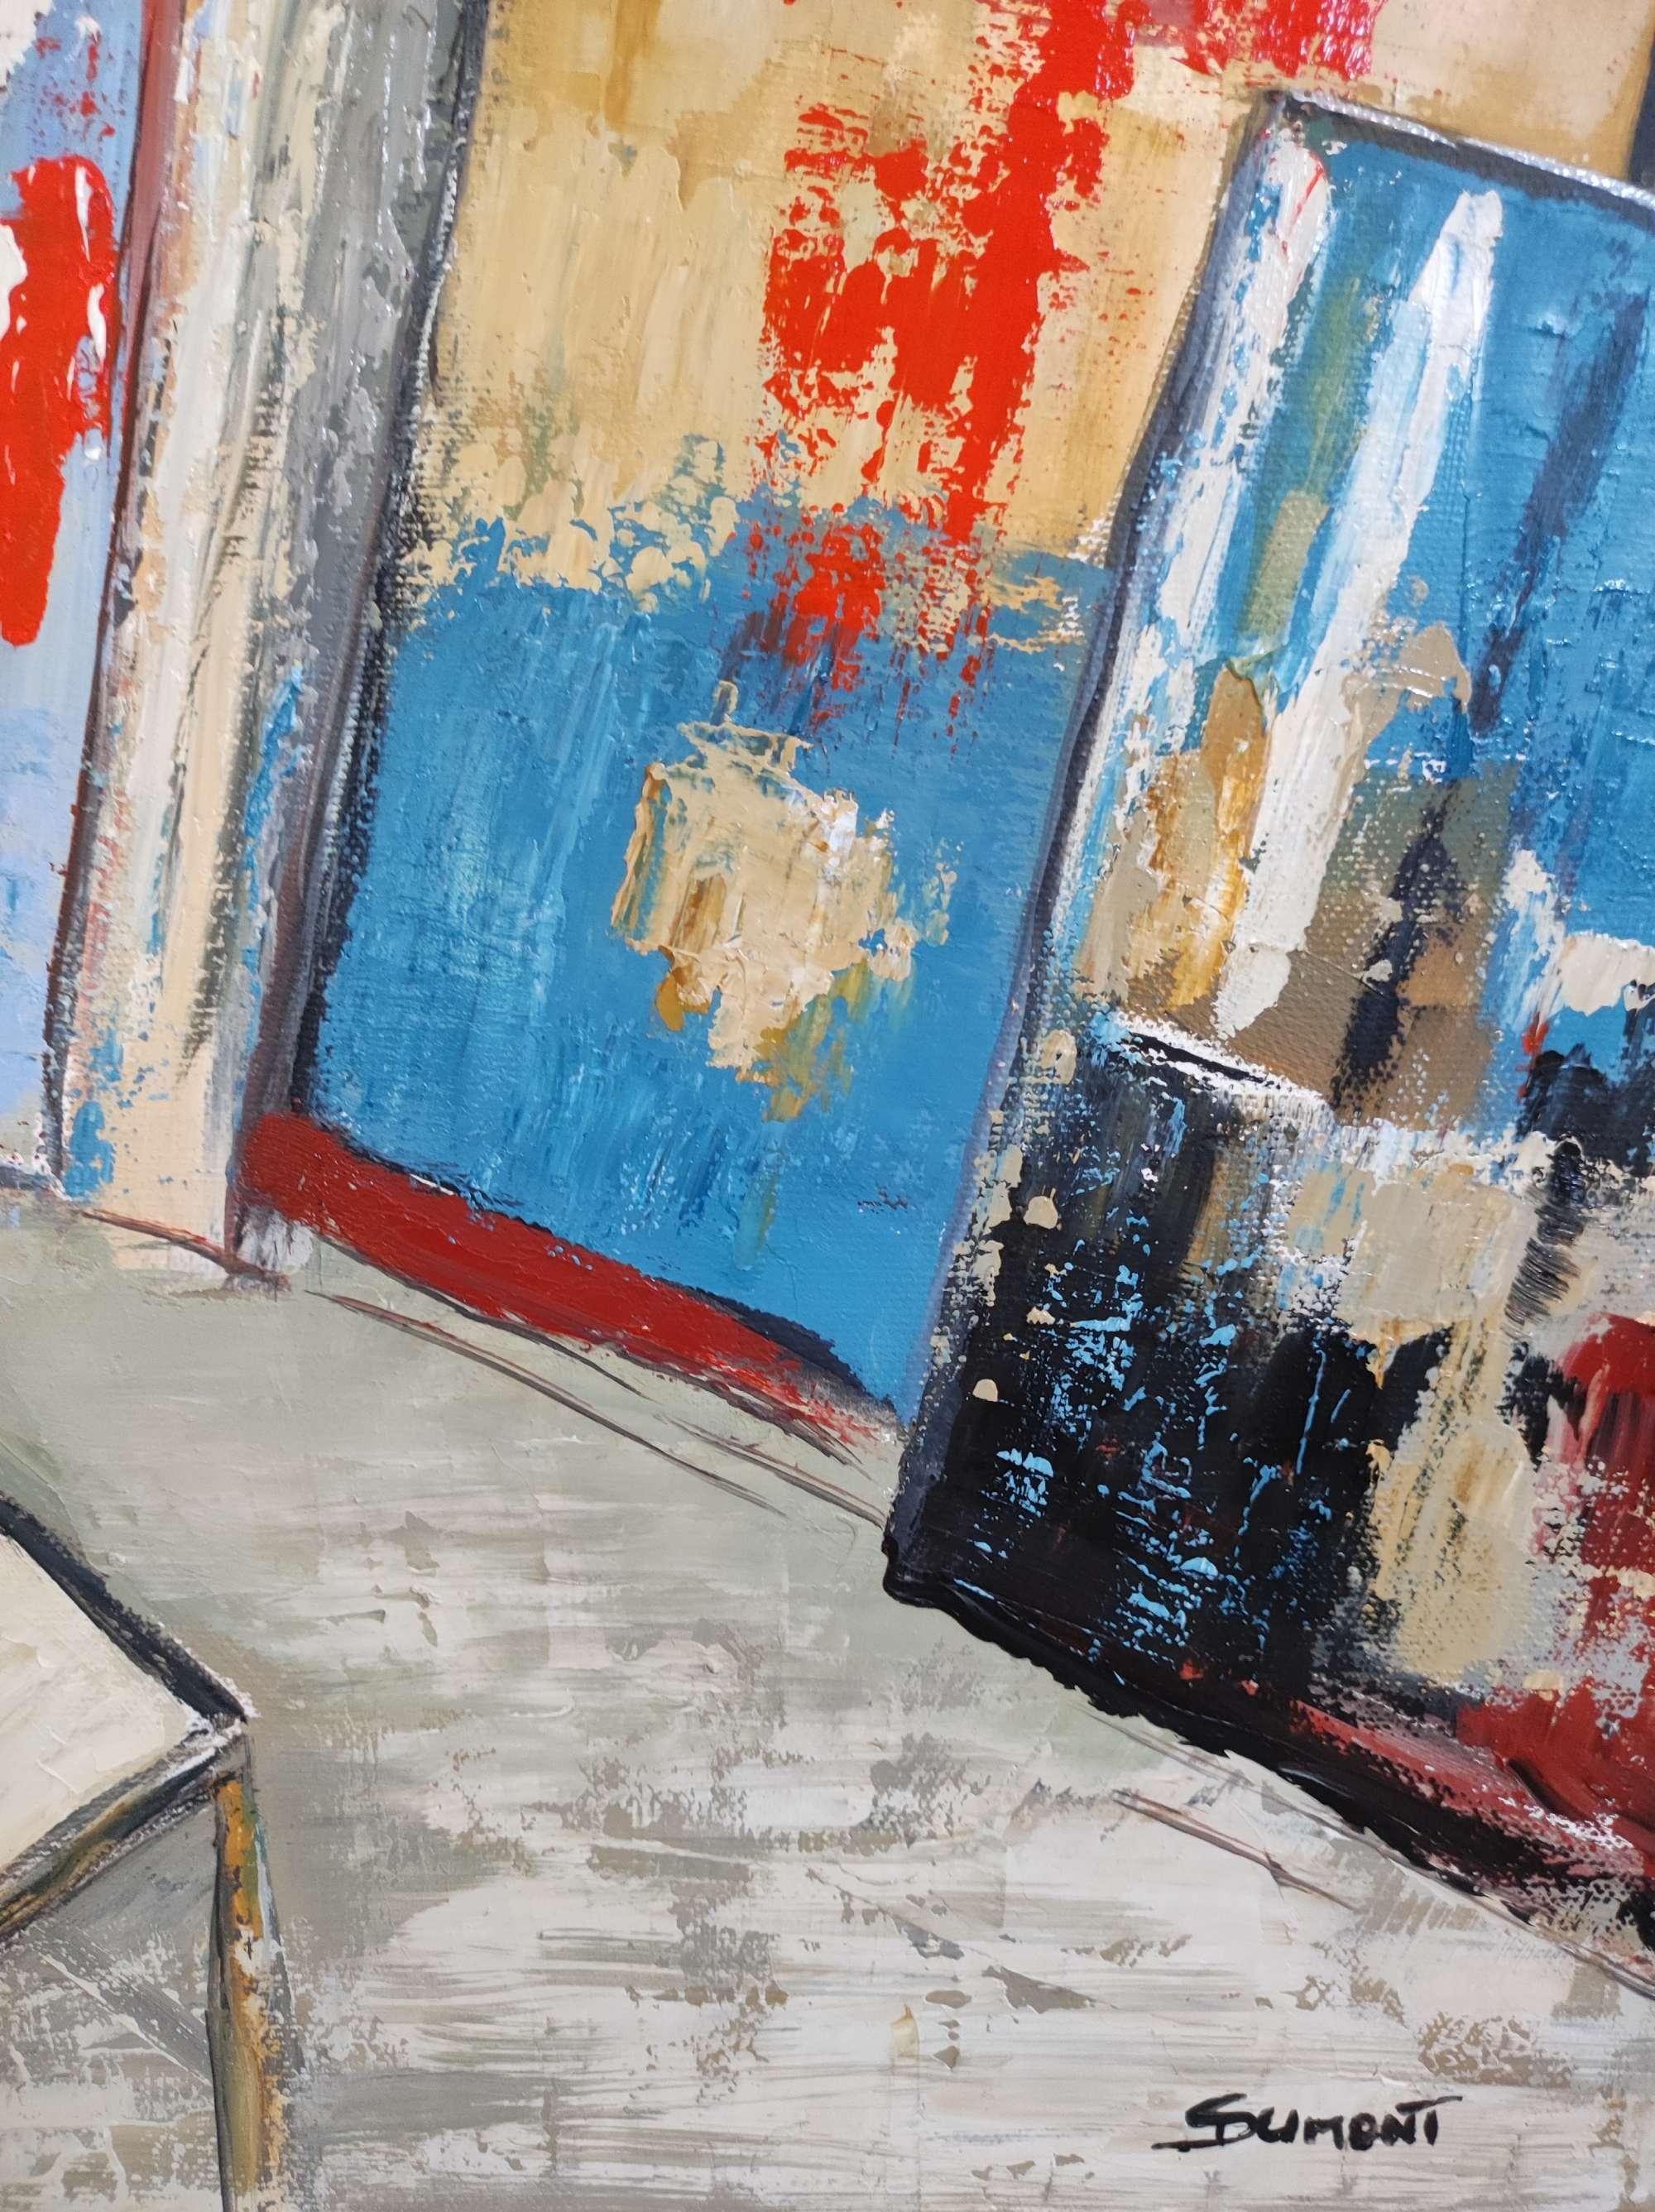 Sophie DUMONT's abstract is not a concept, it is an approach where each canvas is built around graphics put into perspective by color.

Geometric abstraction of an artist's studio in shades of blue and red with a very important texture and colors